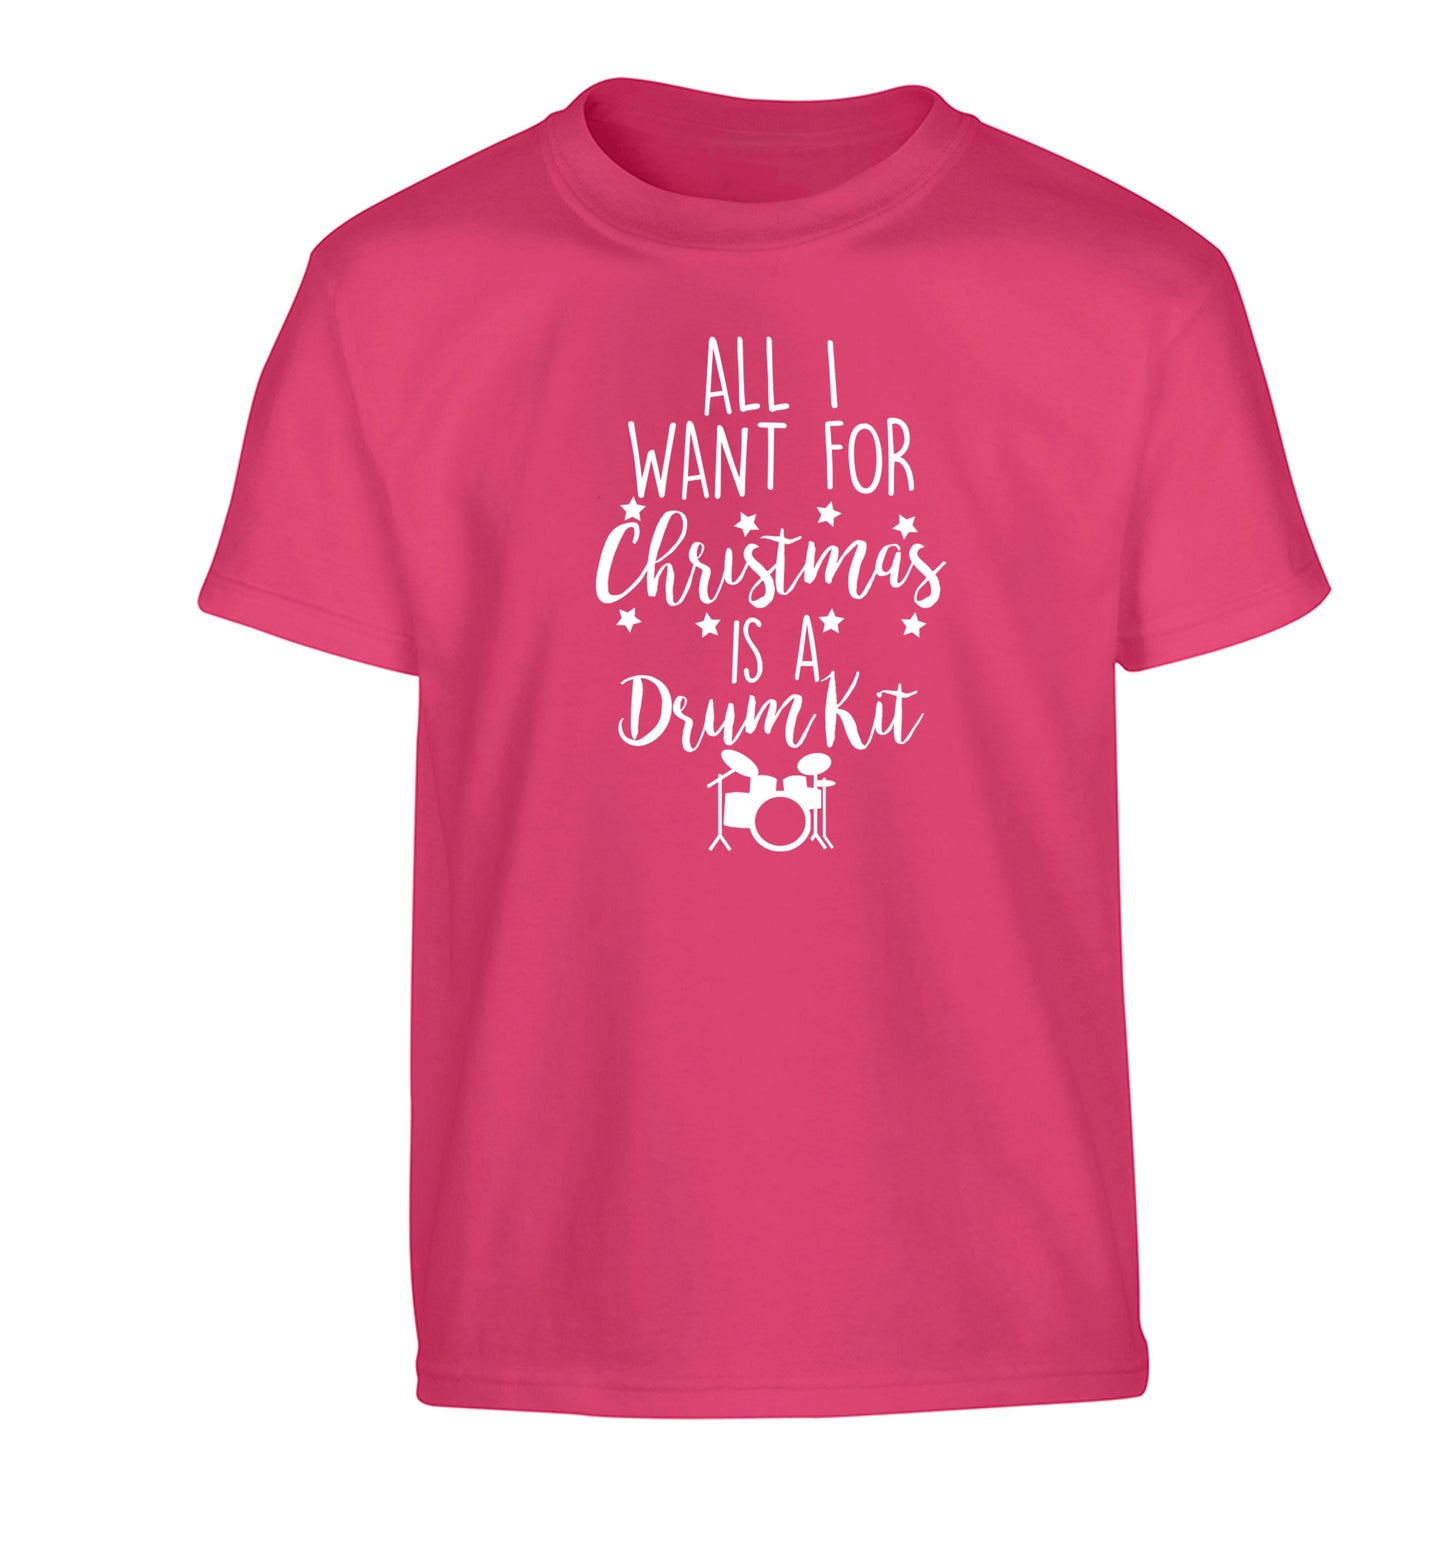 All I want for Christmas is a drum kit! Children's pink Tshirt 12-14 Years